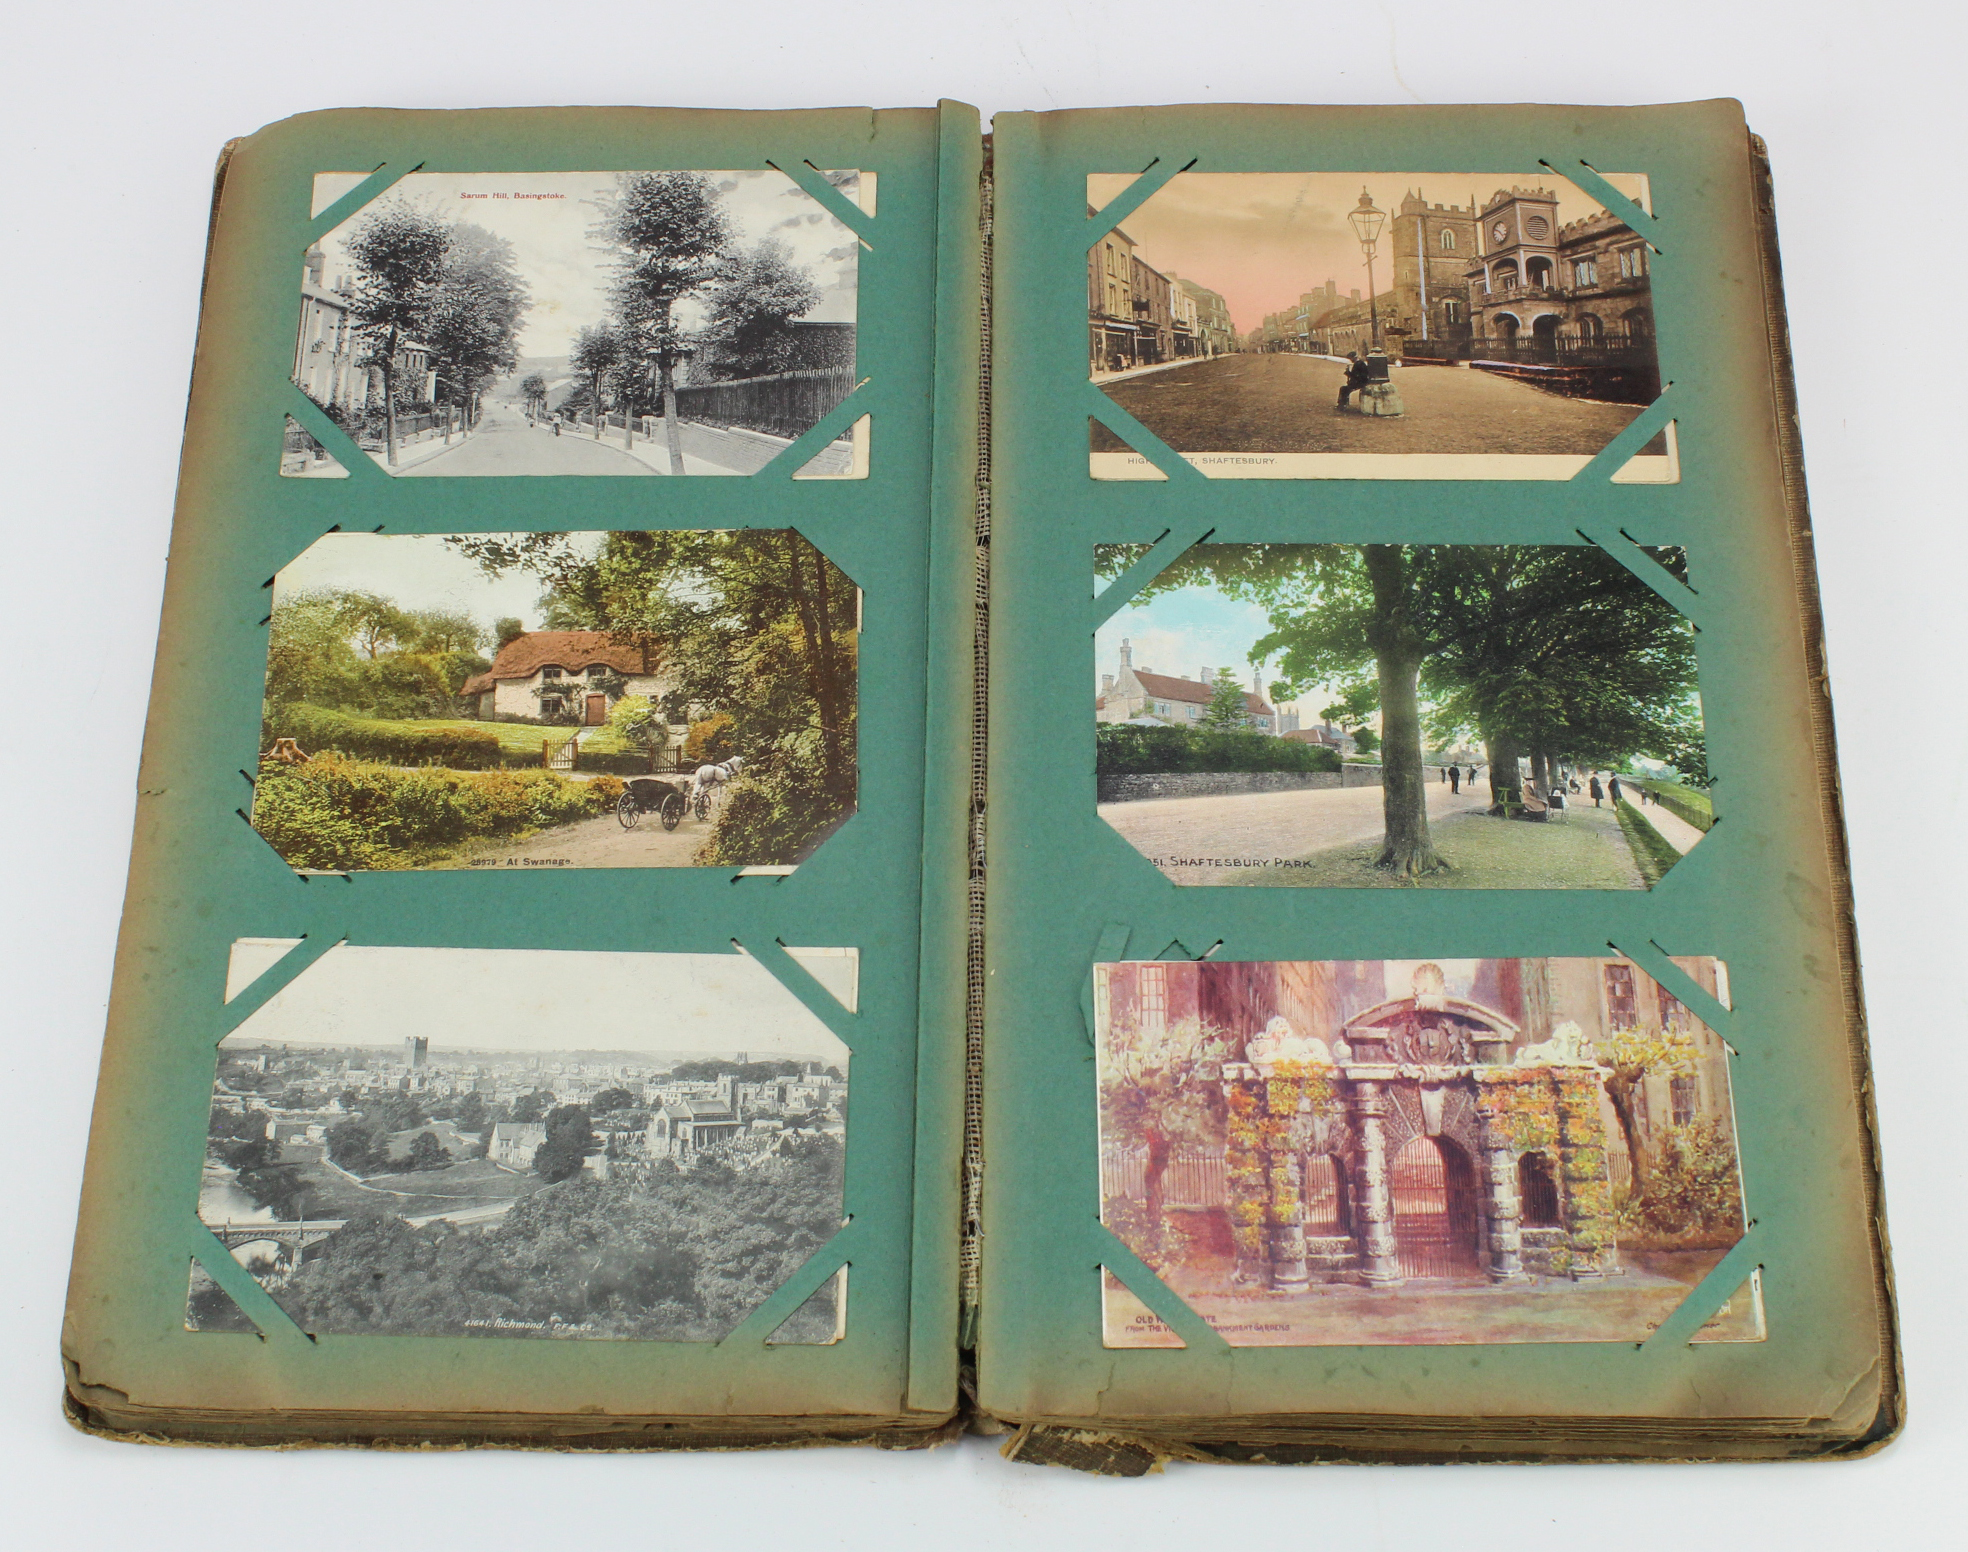 Original collection presented in an Edwardian album, inc topos, subjects inc artist signed, cats,